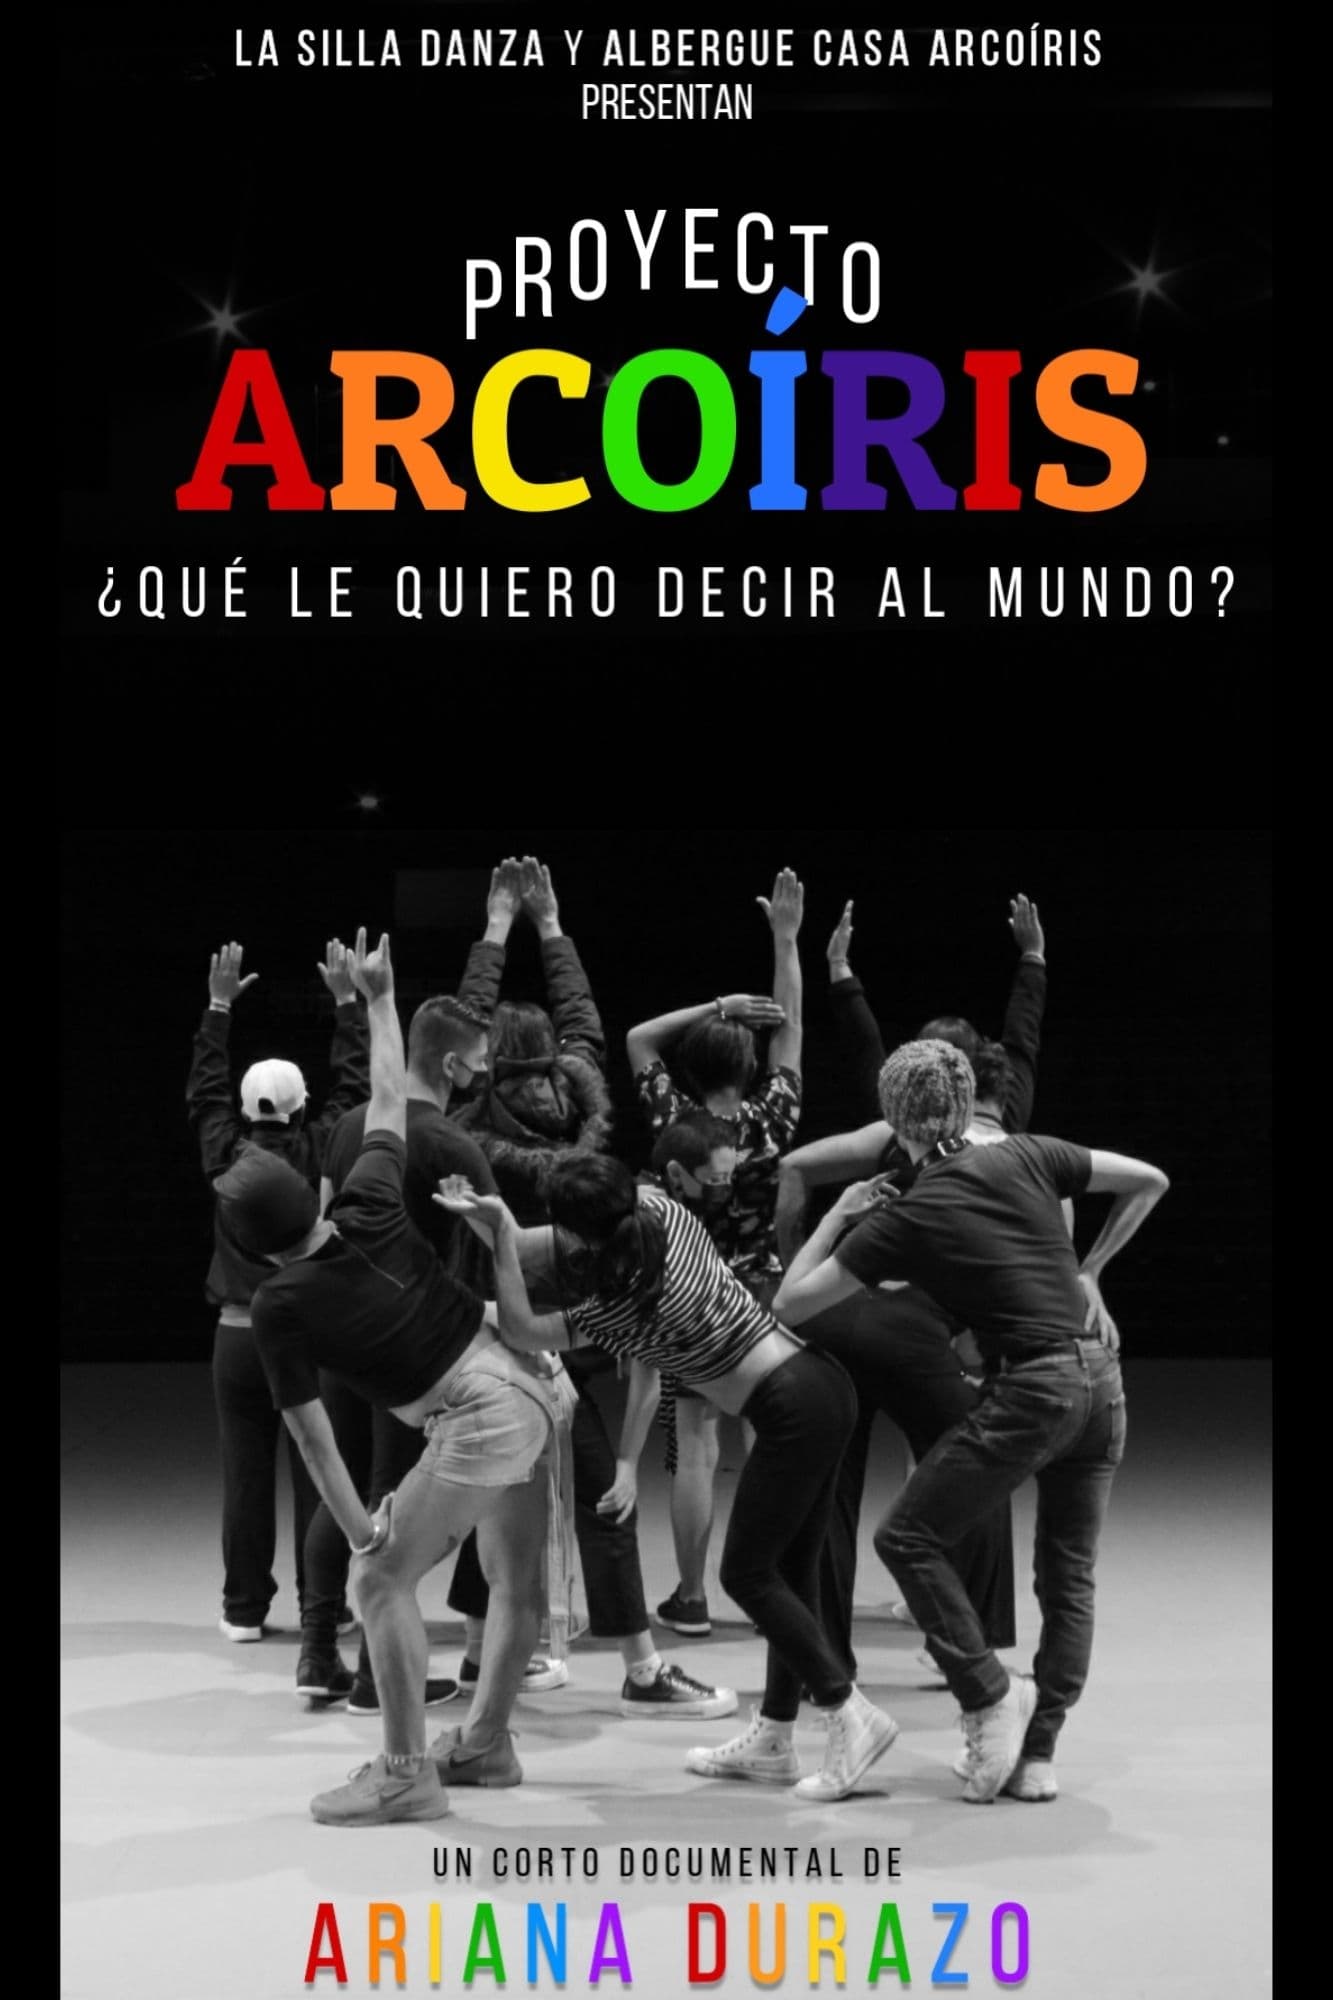 Proyecto Arcoíris: What Do I Want To Say to the World?